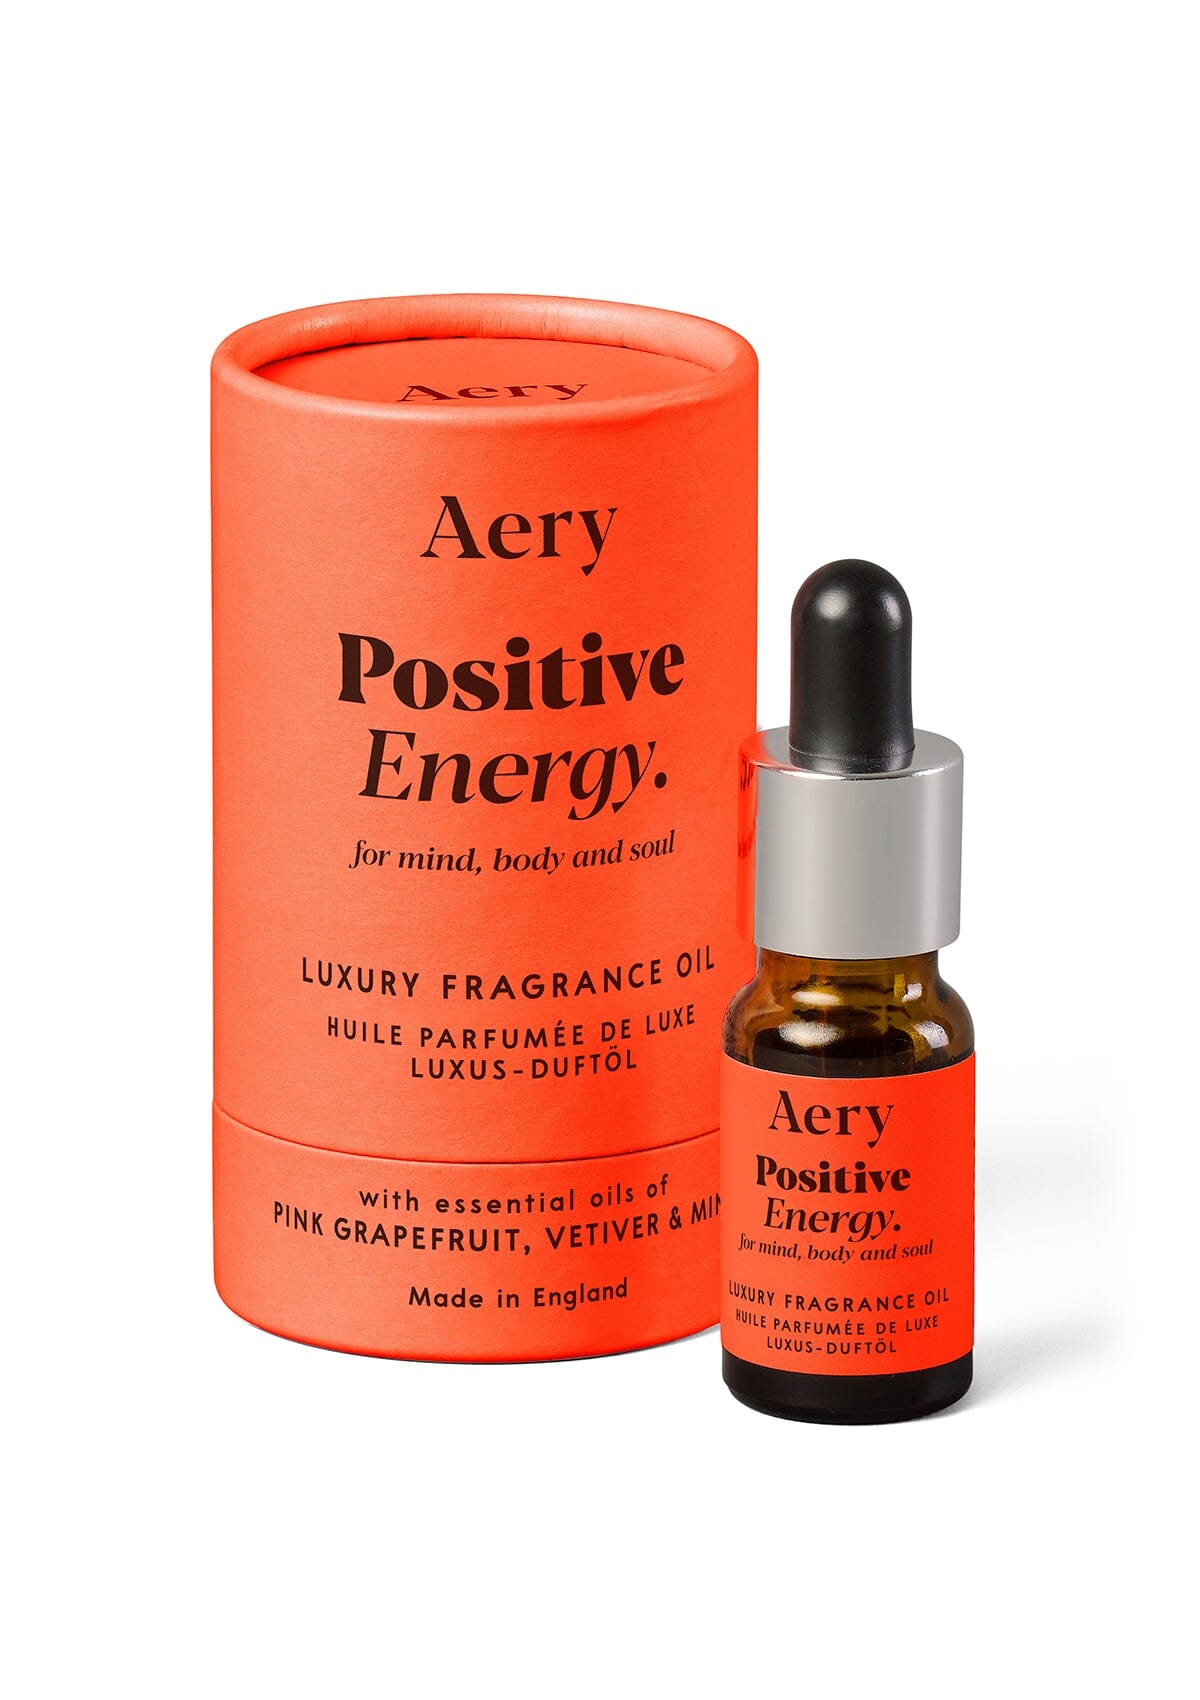 Orange Positive Energy fragrance oil displayed next to product packaging by Aery on white background 